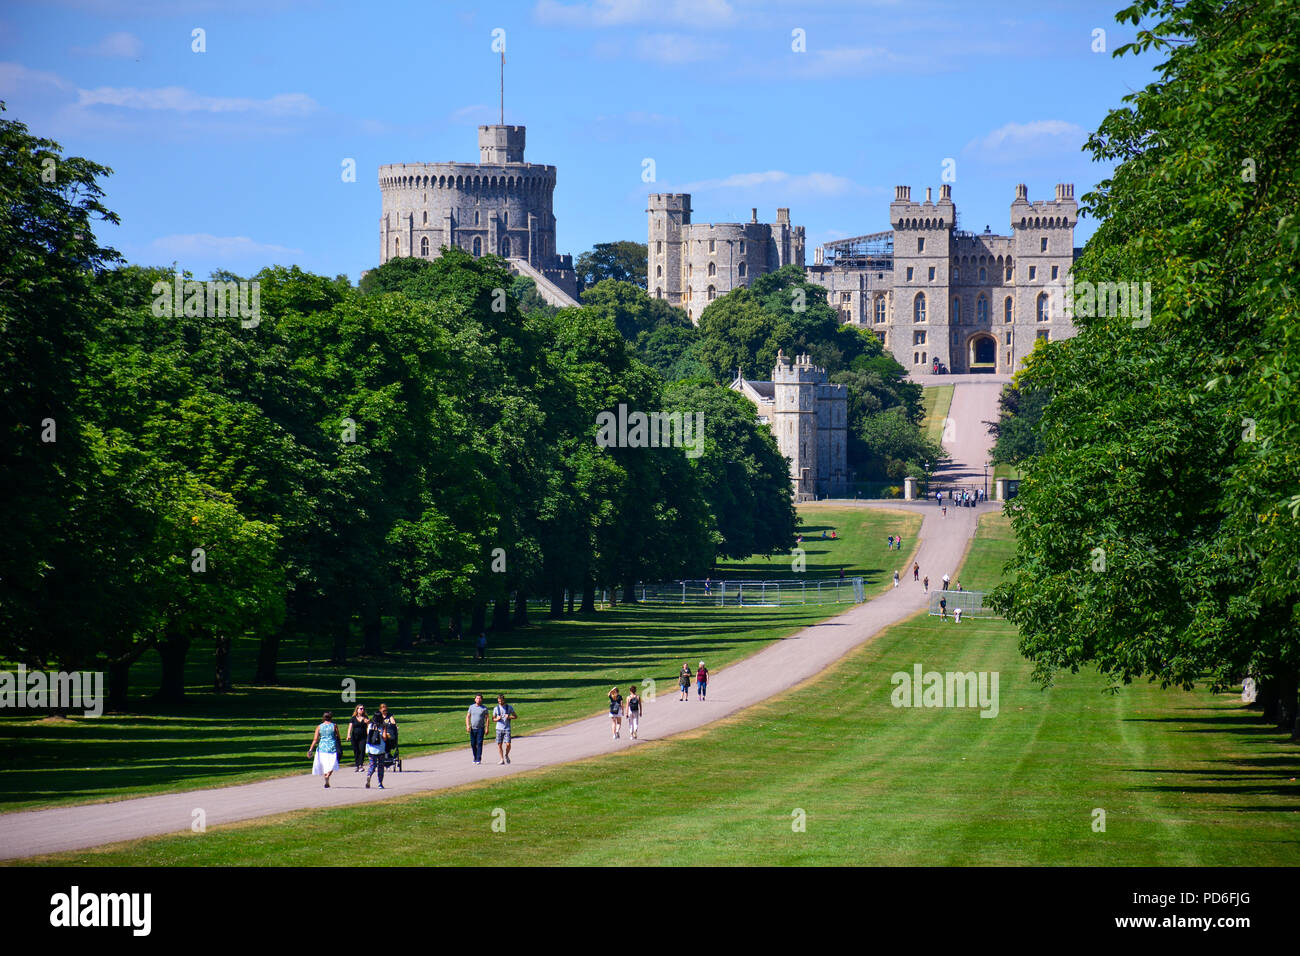 View of the Long Walk in Windsor with Windsor castle, a royal residence associated with many notable events in the history of British Royal Family Stock Photo